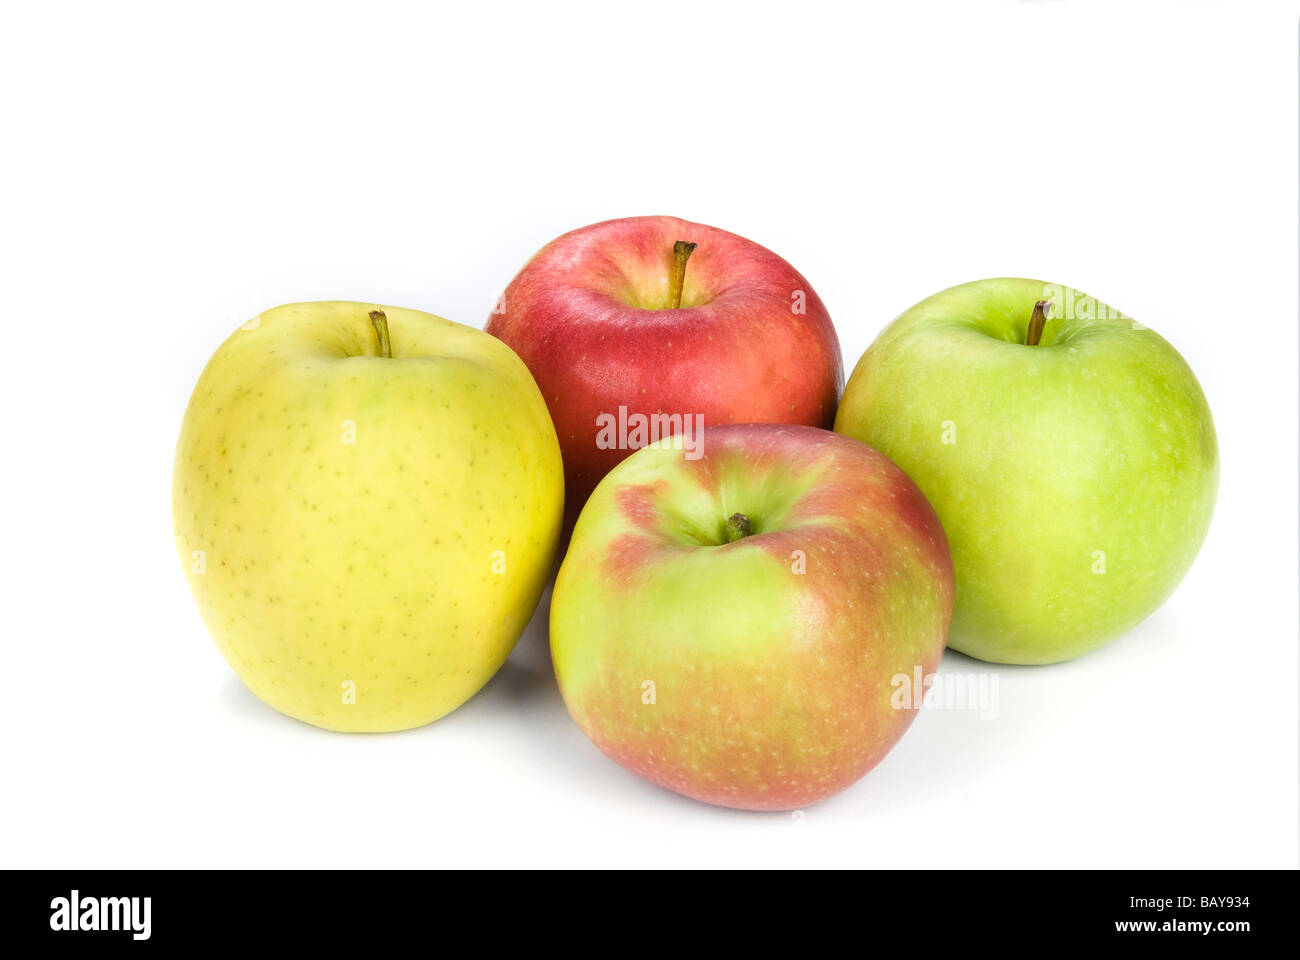 Four apples show the variety from yellow to granny smith to a common red apple Stock Photo